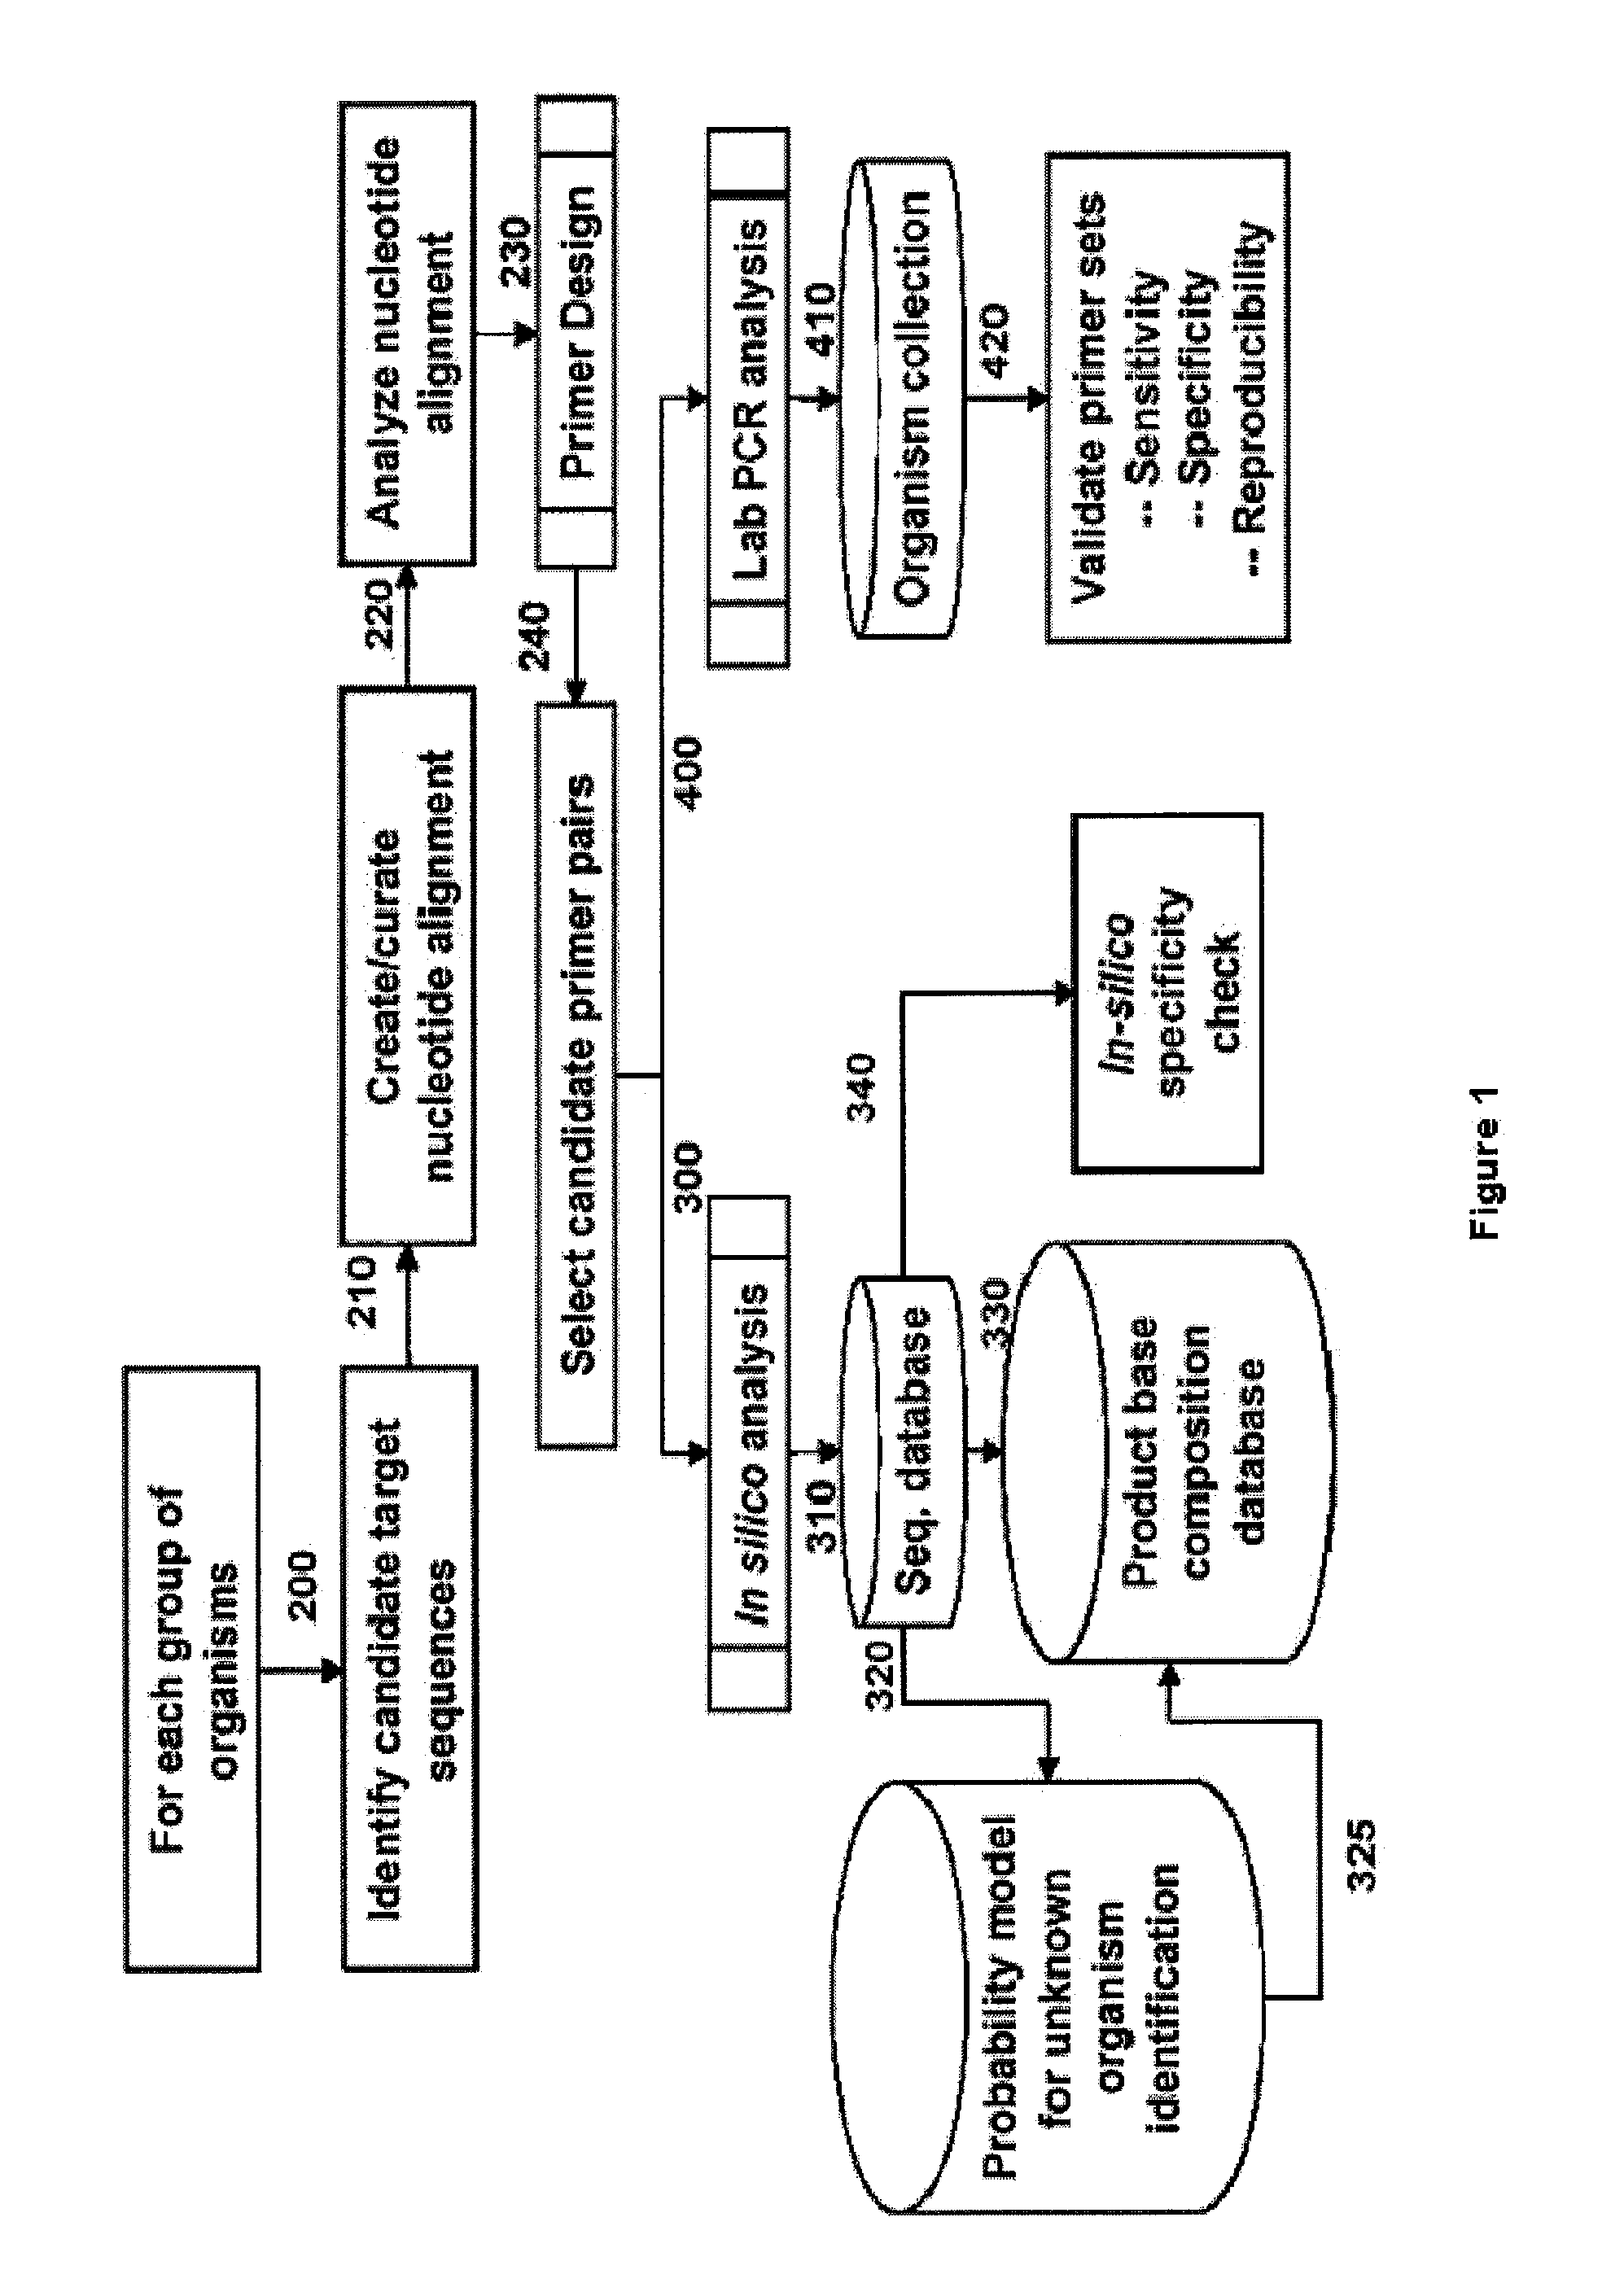 Compositions for use in identification of mixed populations of bioagents